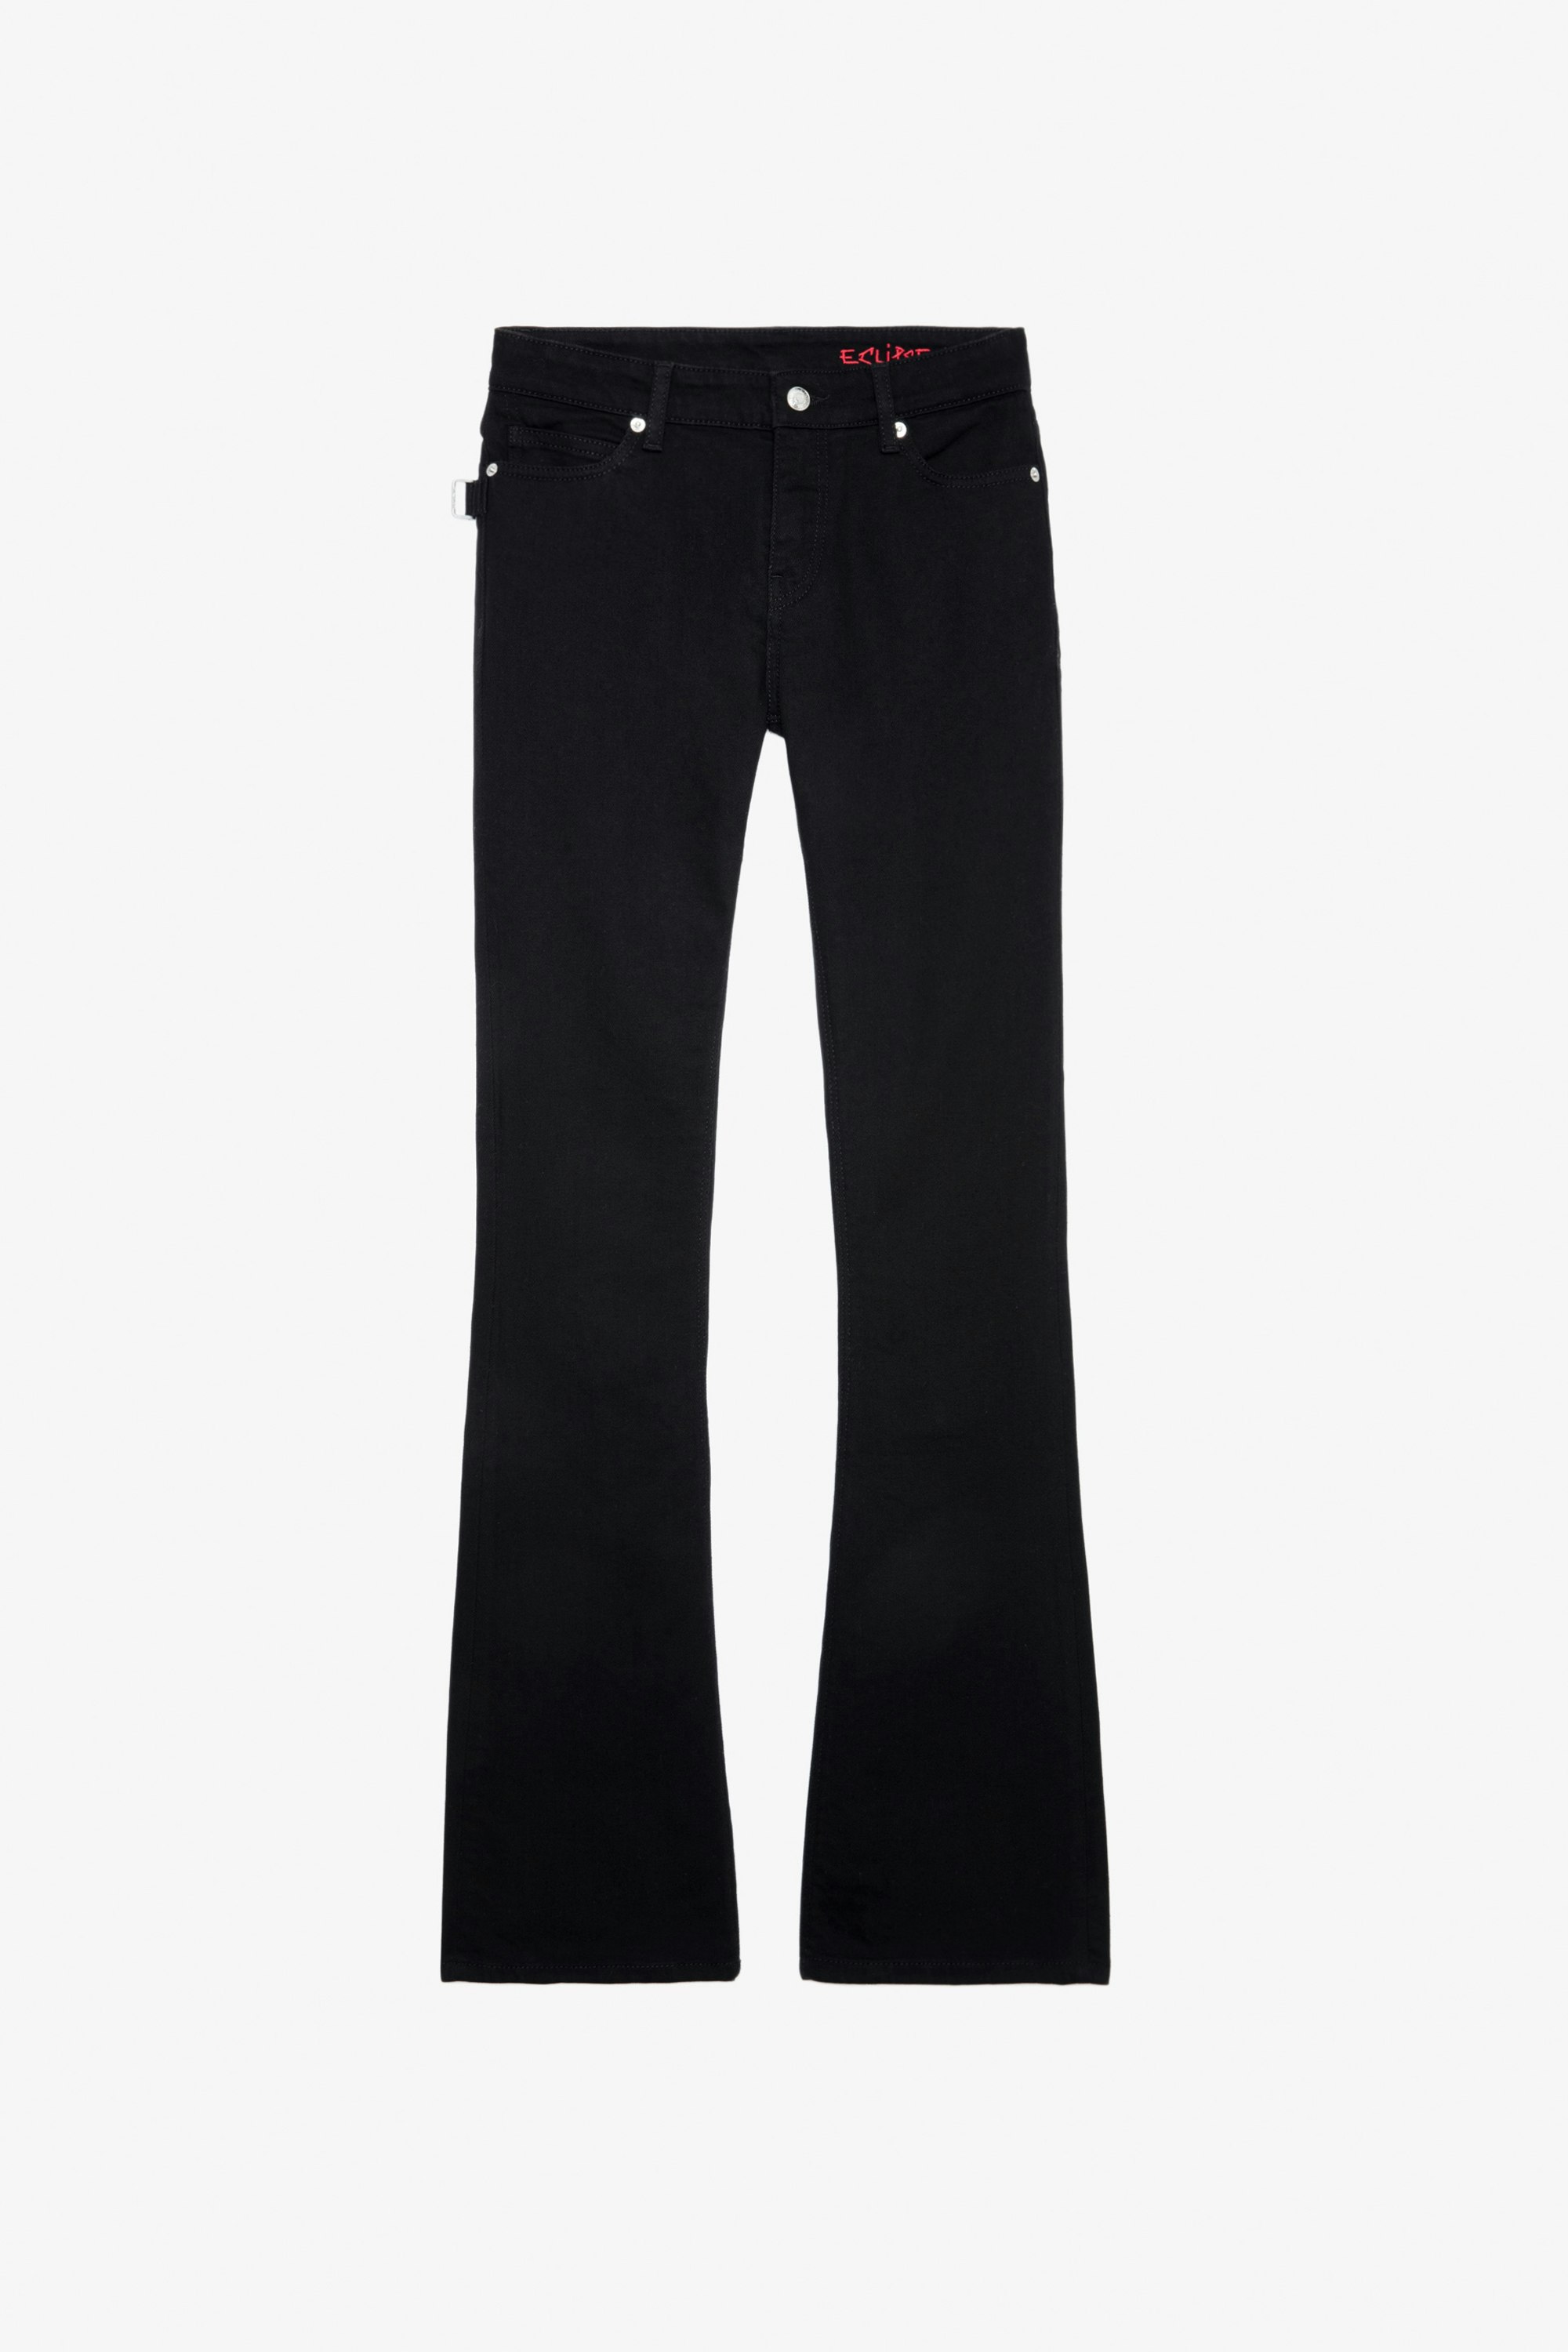 Eclipse Jeans - Women’s flared black denim jeans with “Eclipse” embroidery.